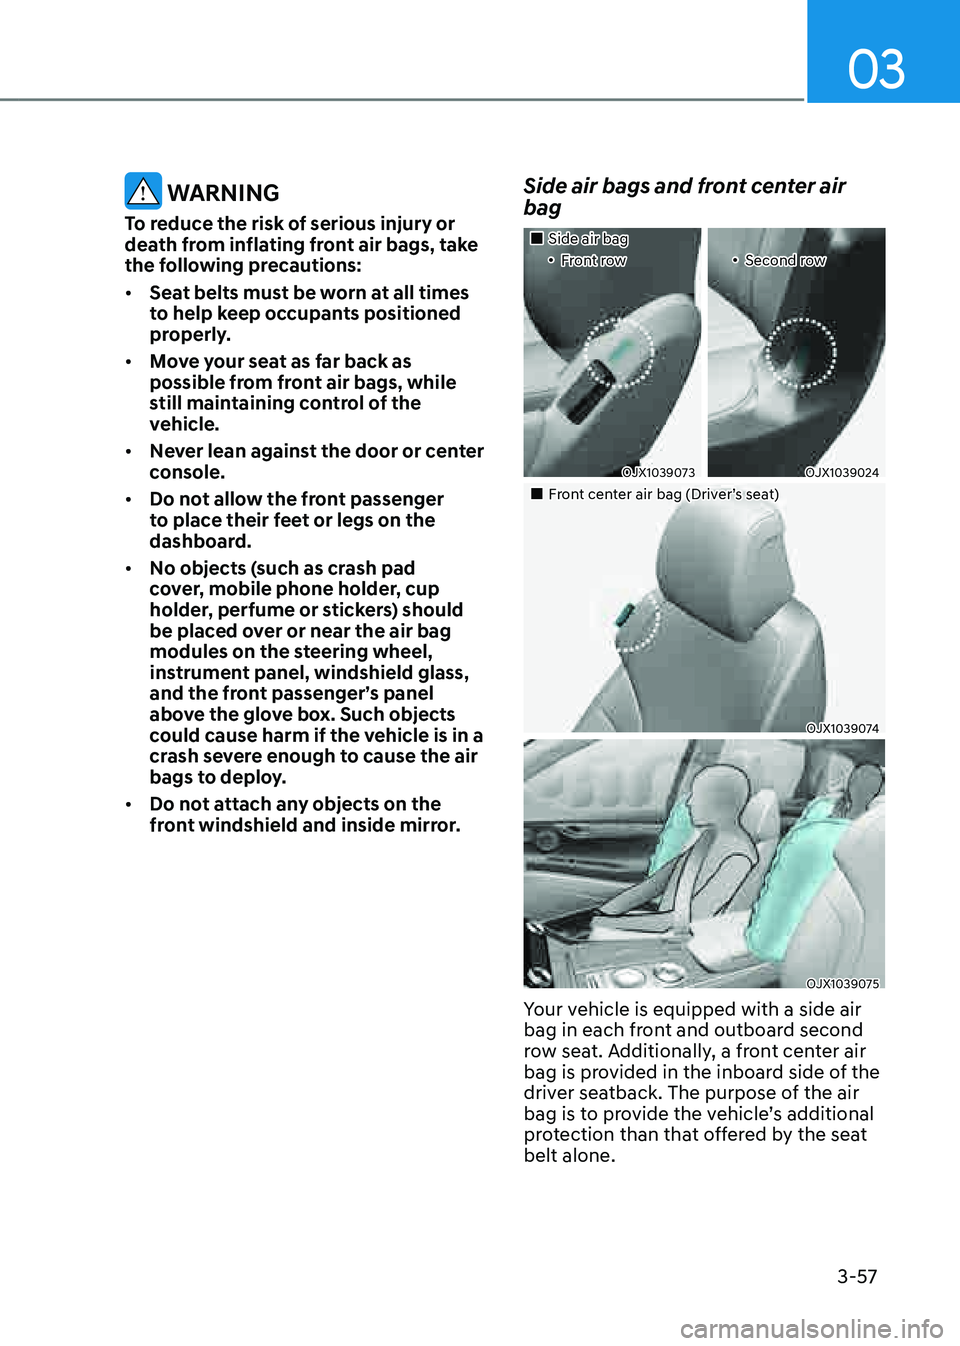 GENESIS GV80 2021  Owners Manual 03
3-57
 WARNING
To reduce the risk of serious injury or 
death from inflating front air bags, take 
the following precautions:
• Seat belts must be worn at all times 
to help keep occupants positio